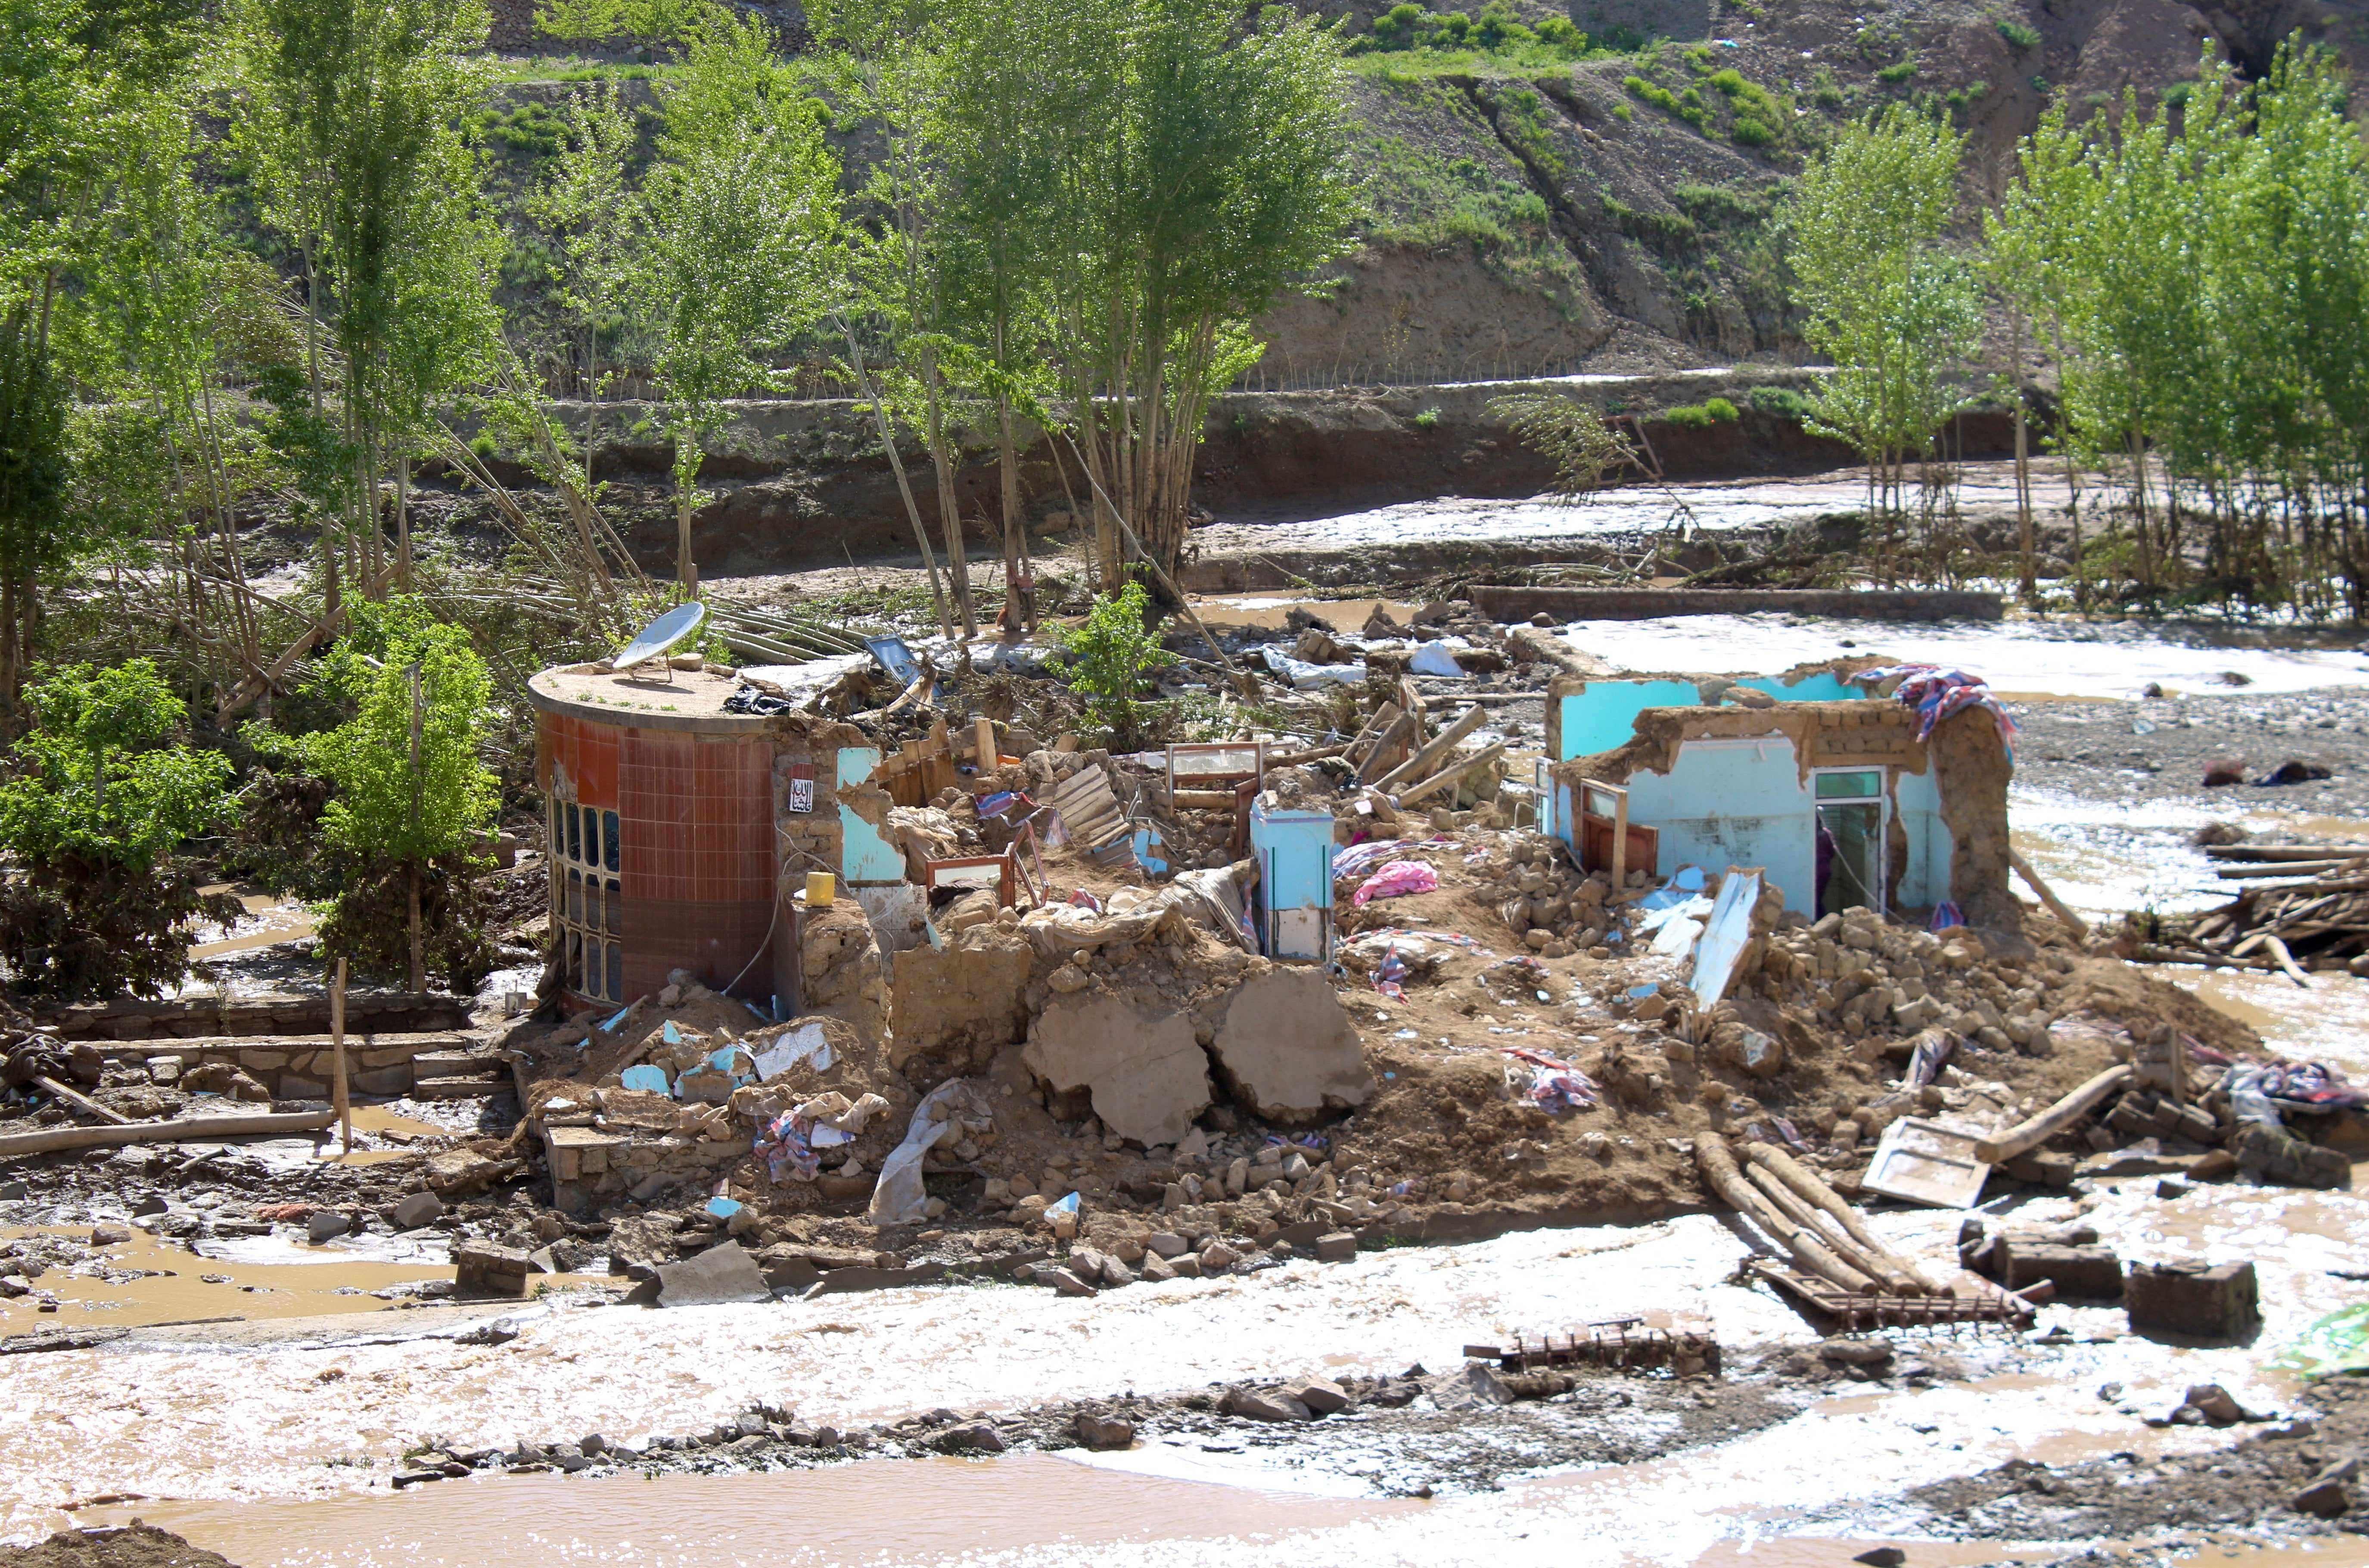 Remainings of houses damaged by the flood are pictured in Firozkoh the capital city of Ghor Province, Afghanistan